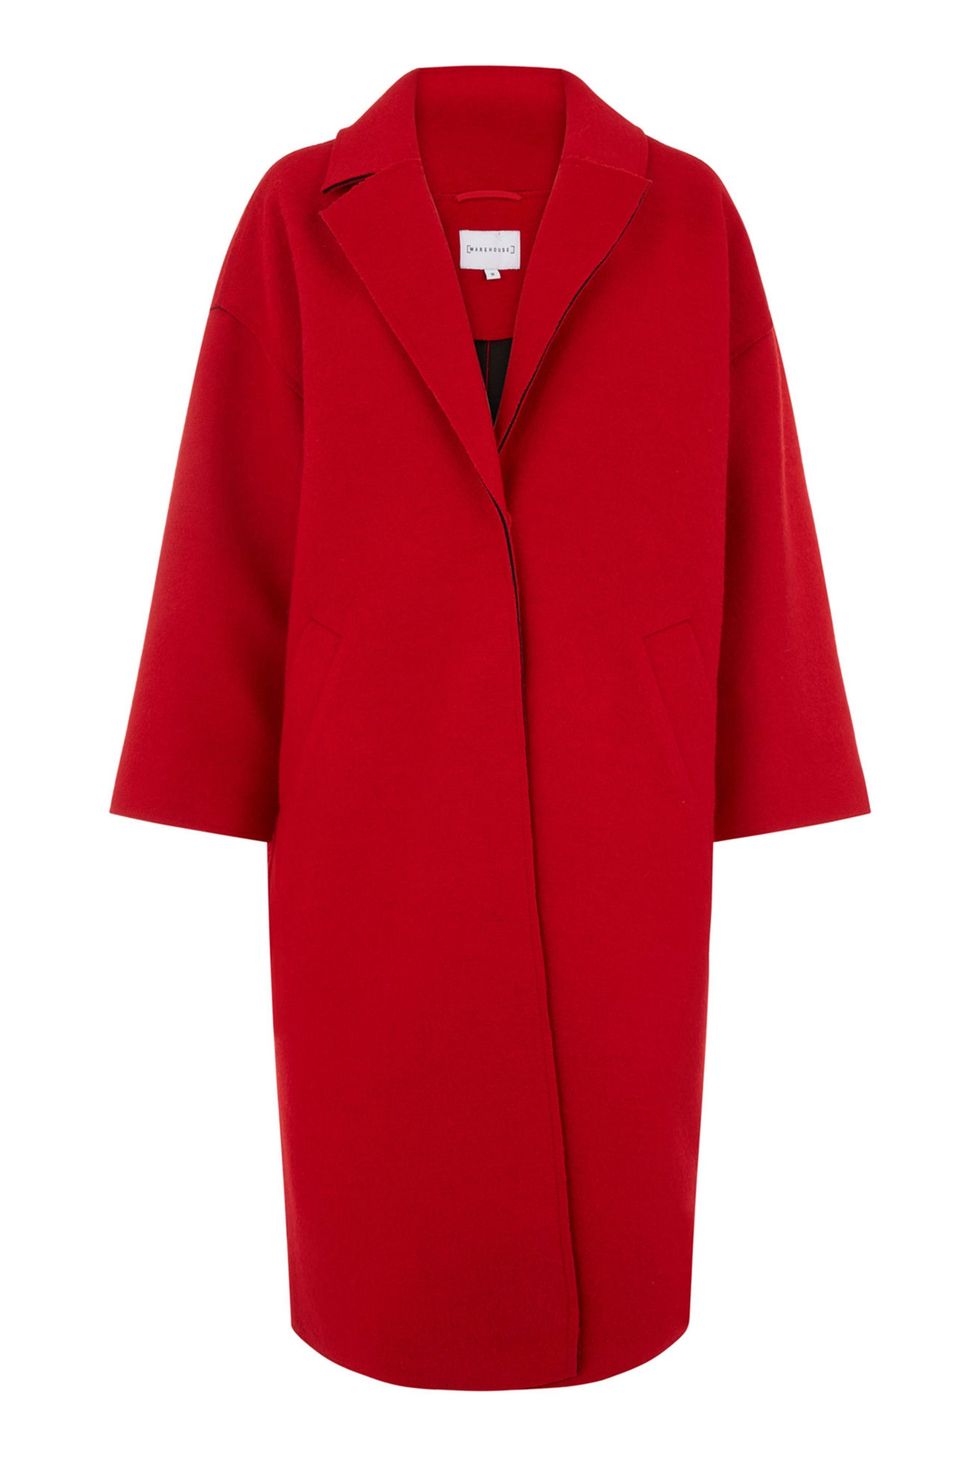 Clothing, Red, Outerwear, Sleeve, Coat, Collar, Overcoat, Robe, 